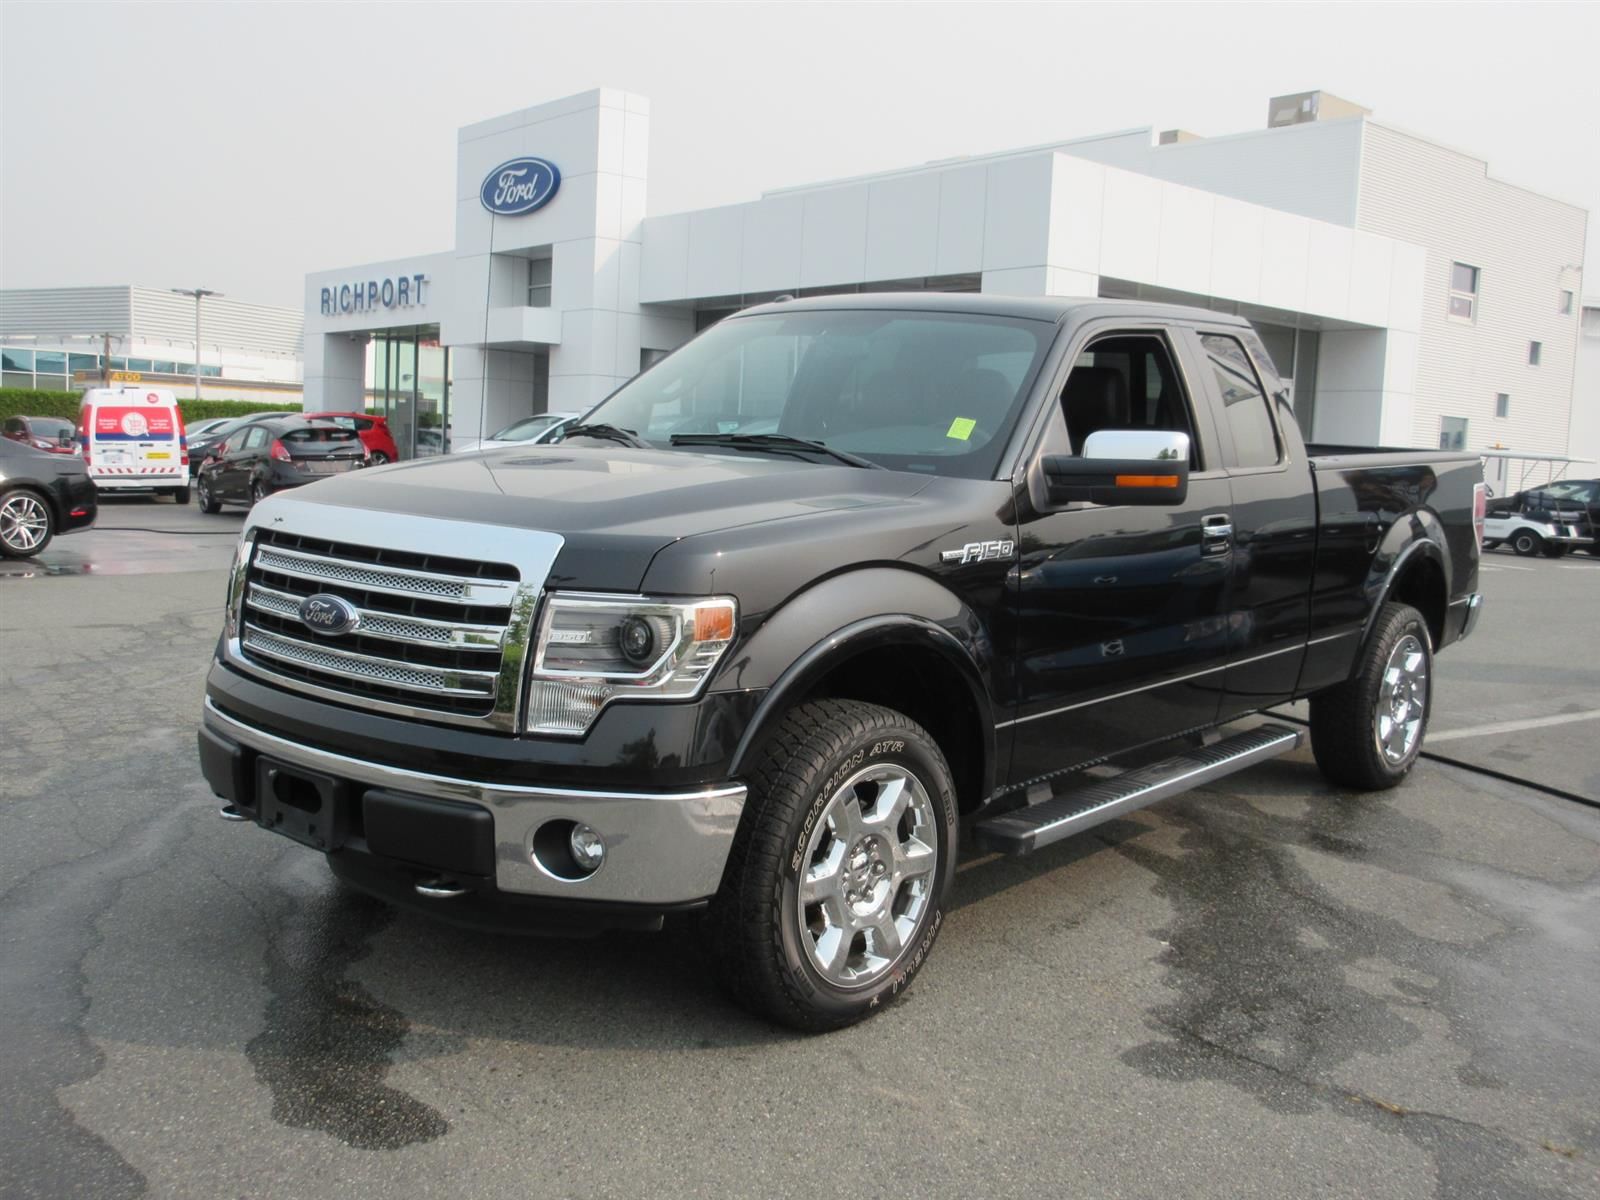 Richport ford used vehicles #4